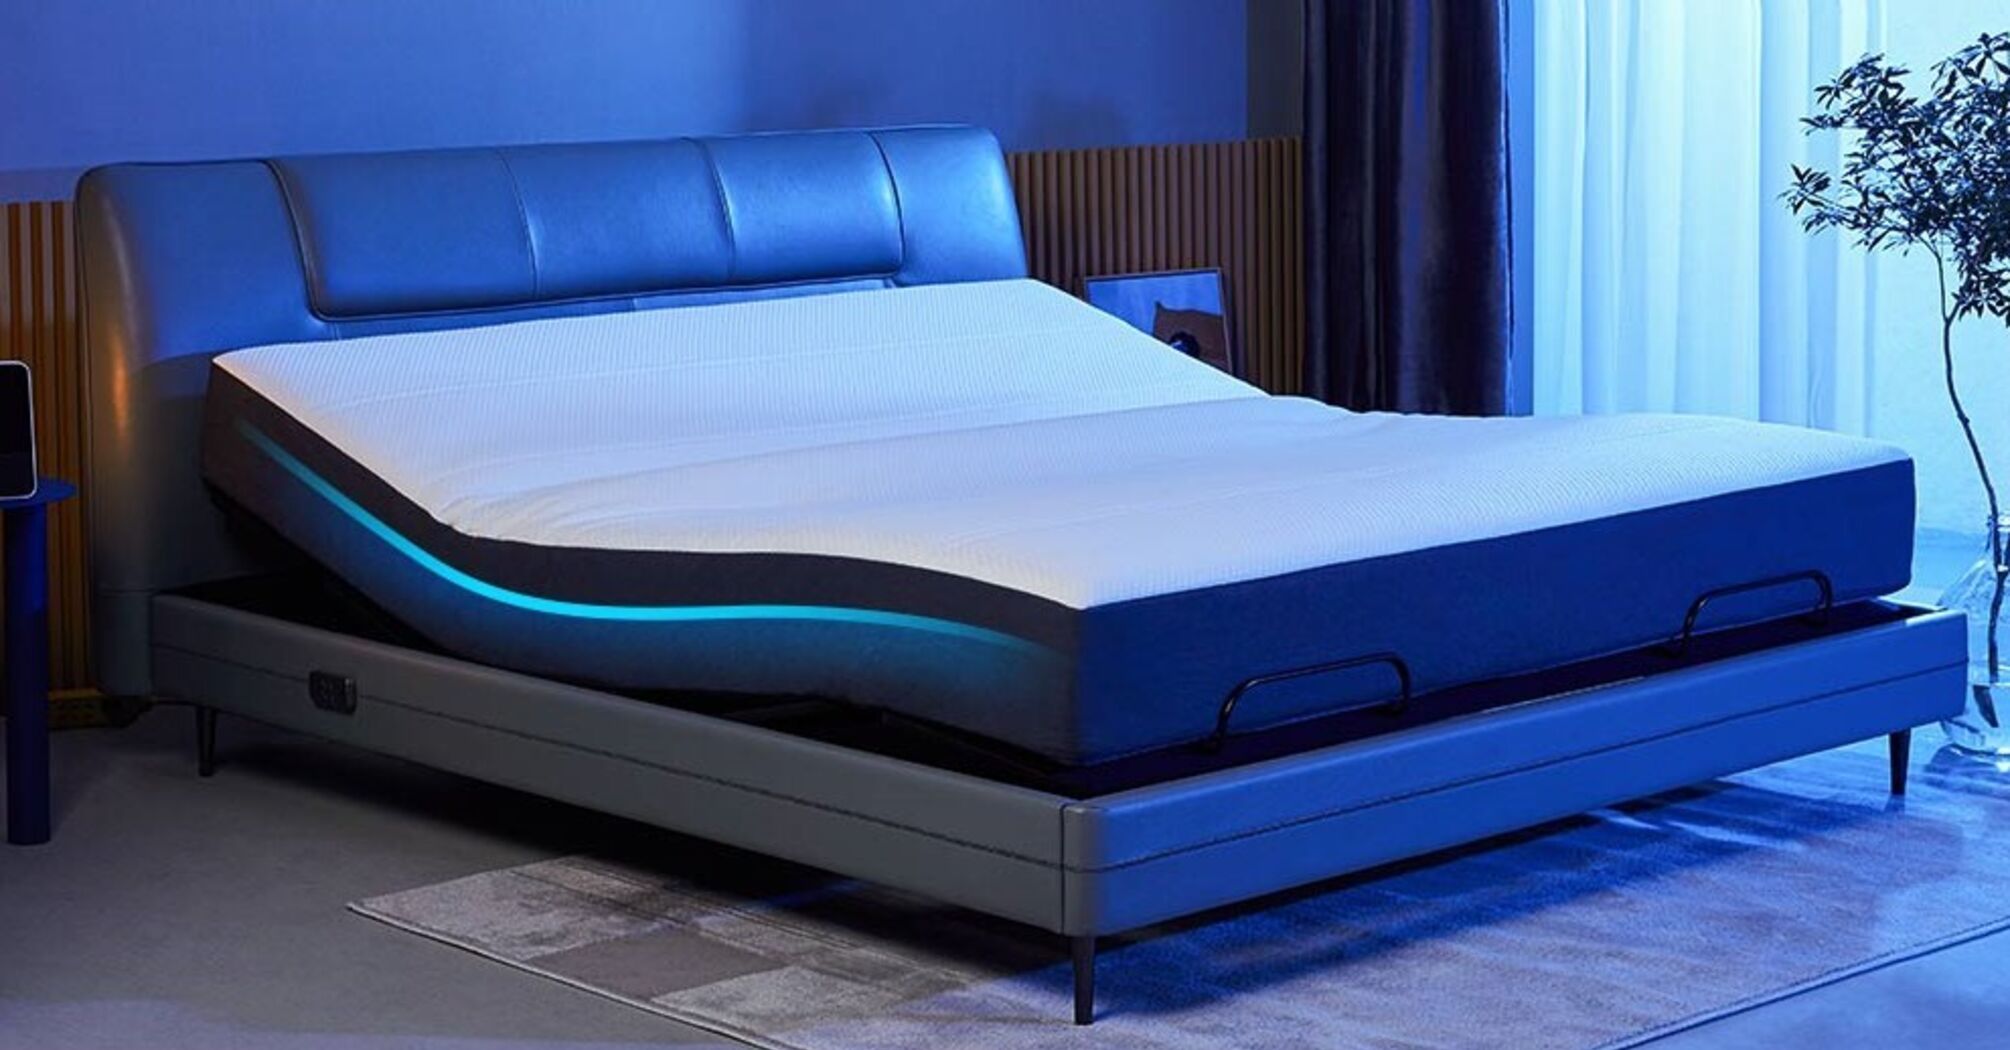 Overview of the innovative voice-controlled bed from Xiaomi